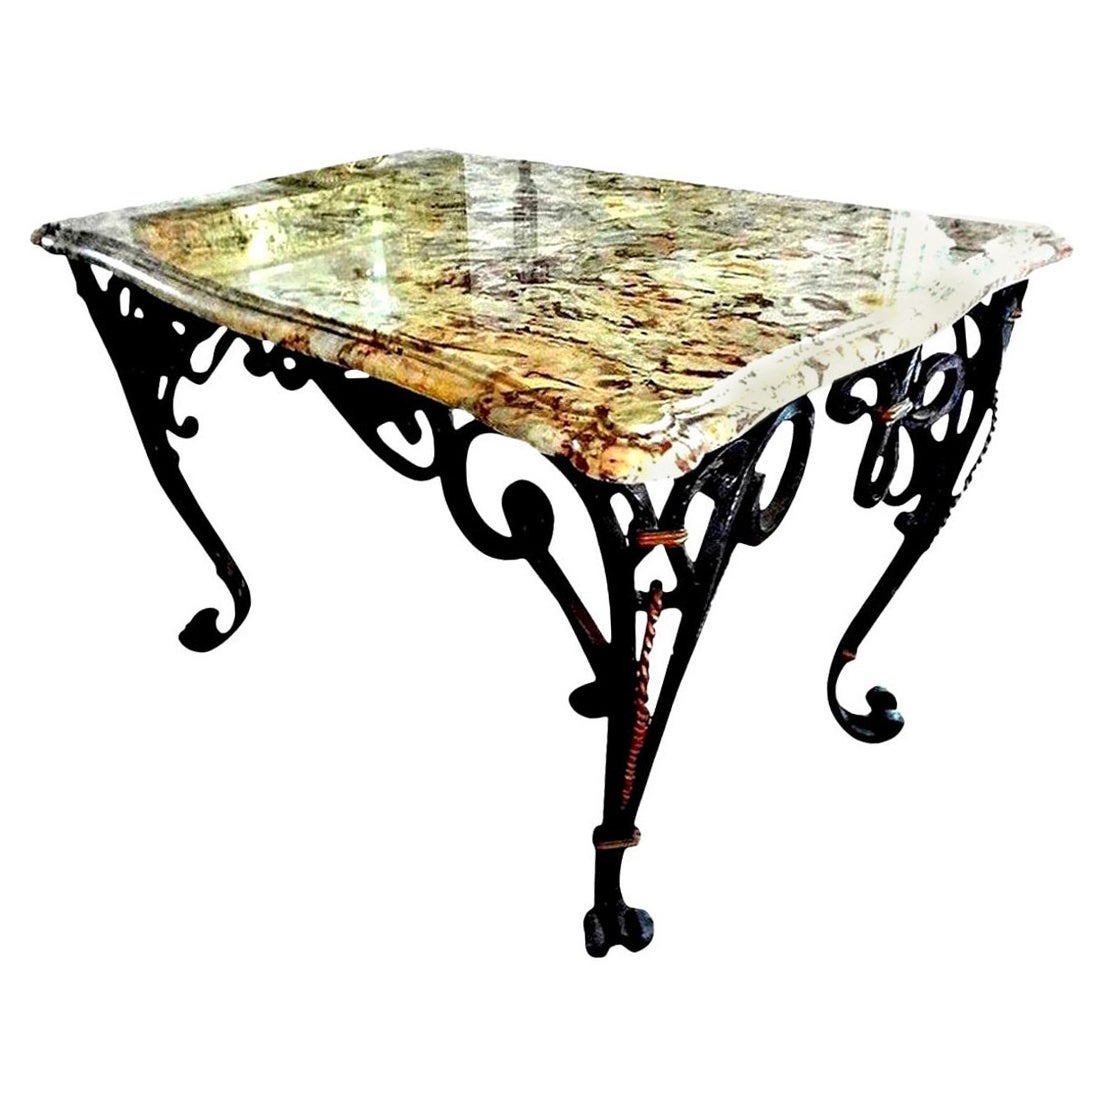 Gilbert Poillerat Inspired French Wrought Iron Center Table